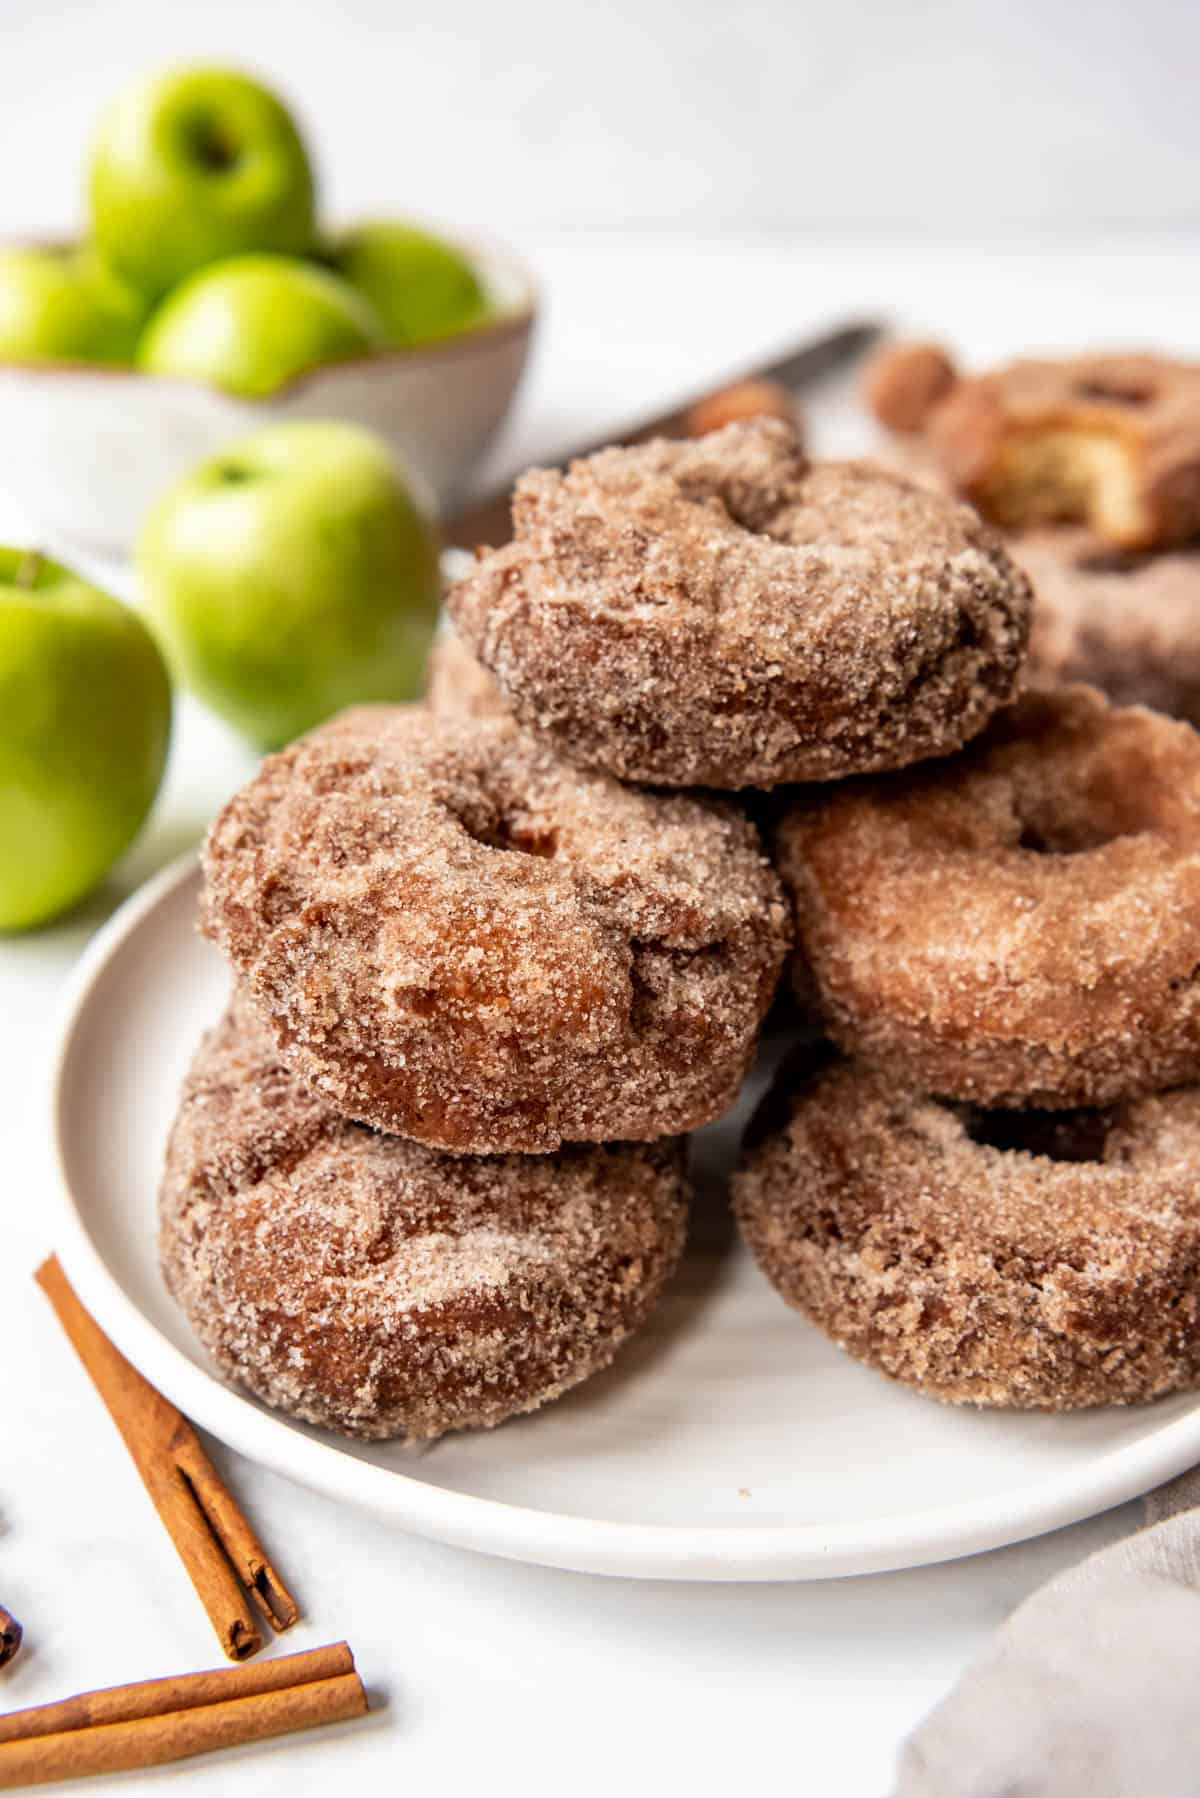 Homemade apple cider donuts stacked on a plate in front of green granny smith apples.